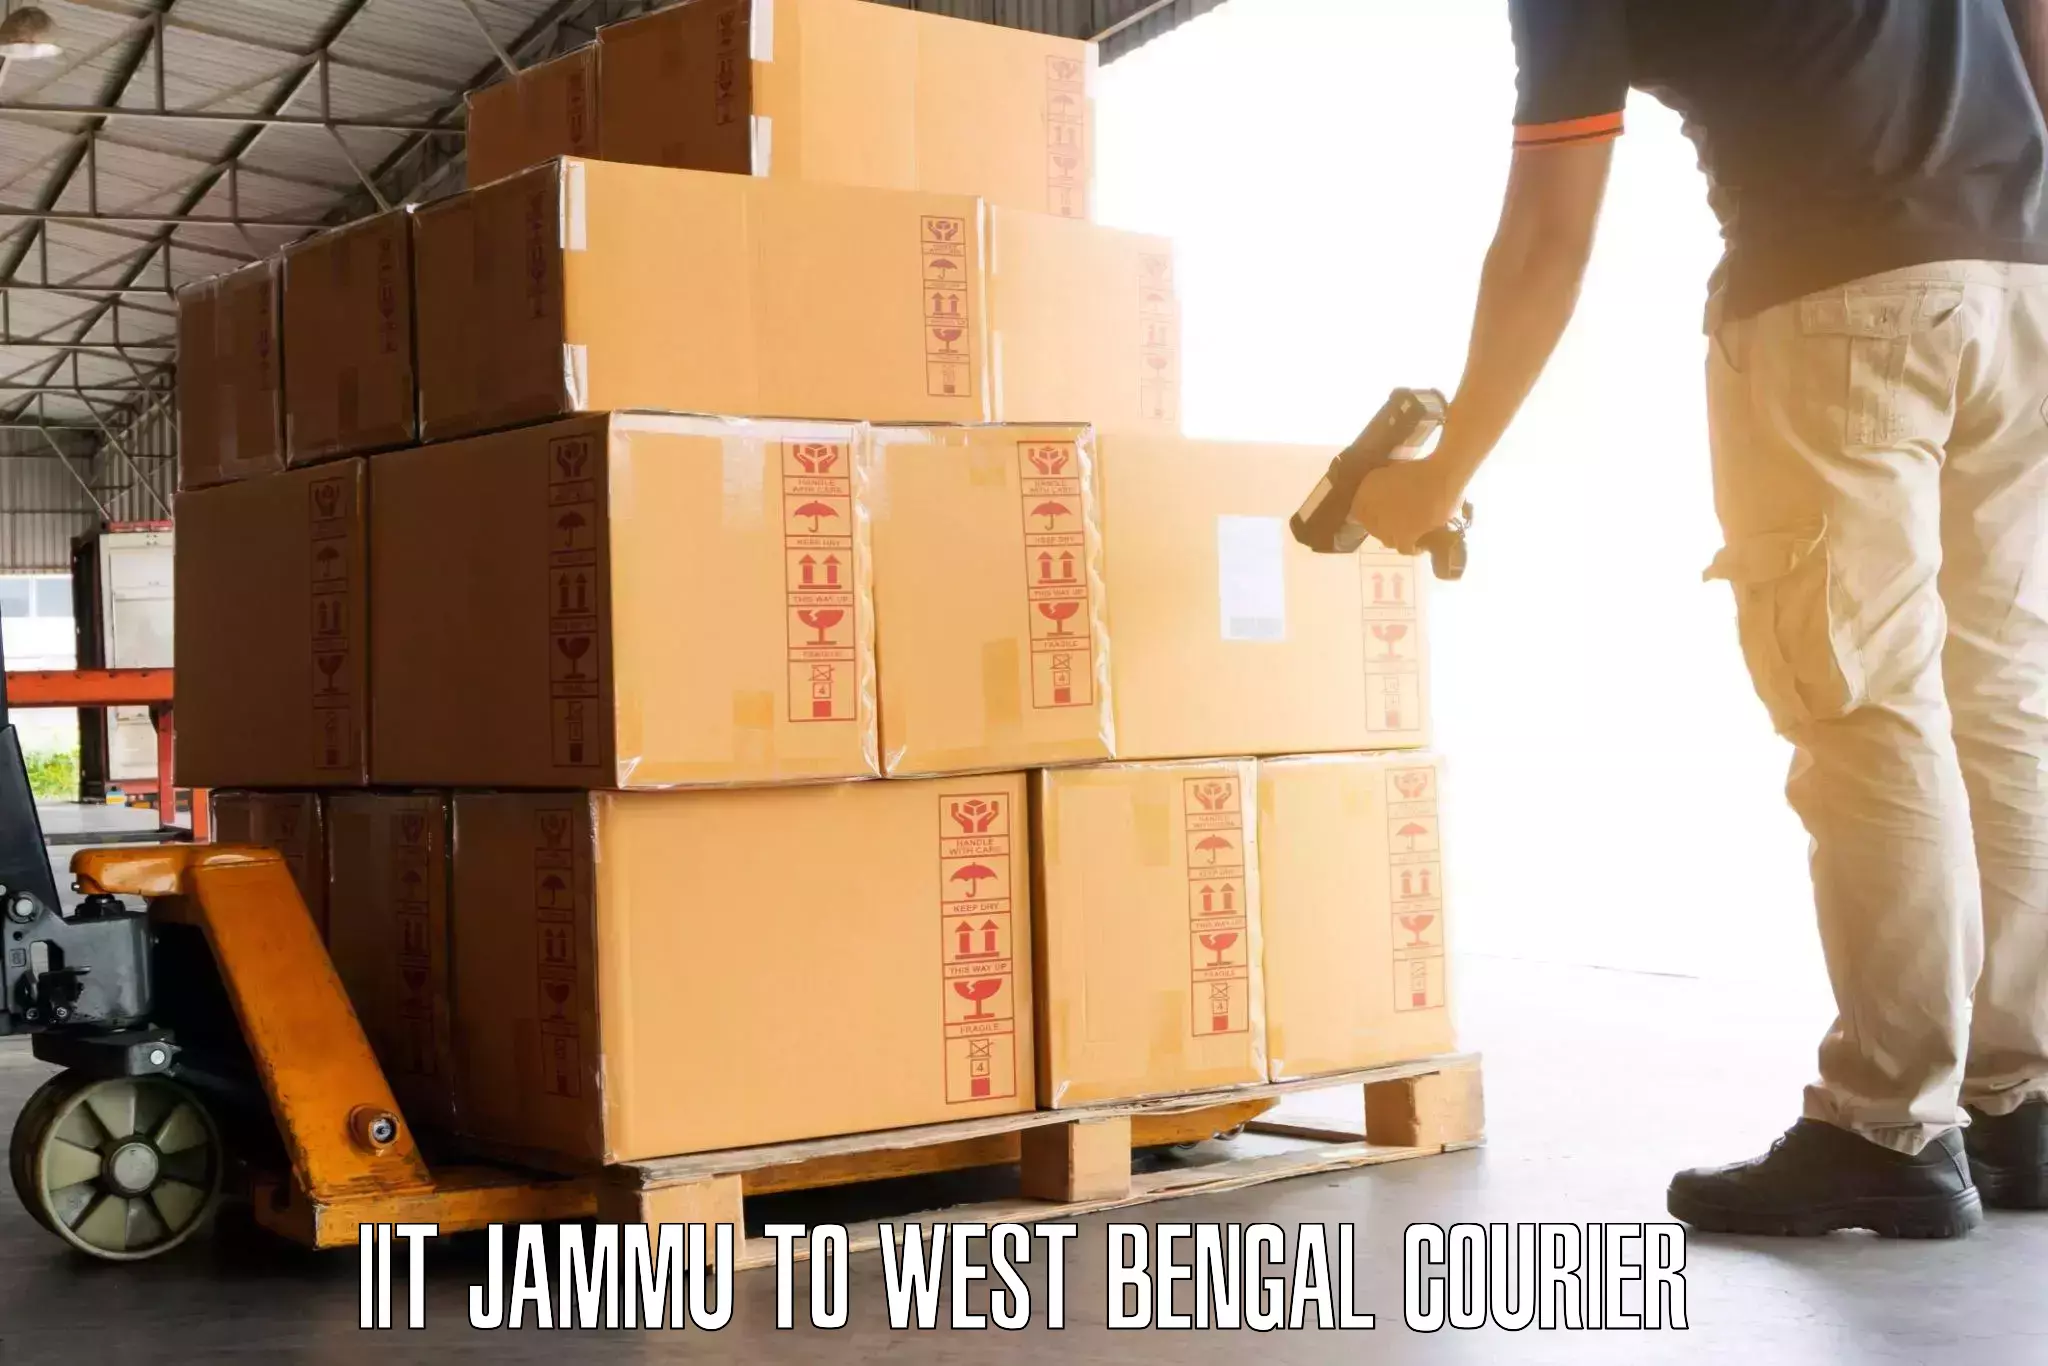 Luggage transport consultancy IIT Jammu to West Bengal